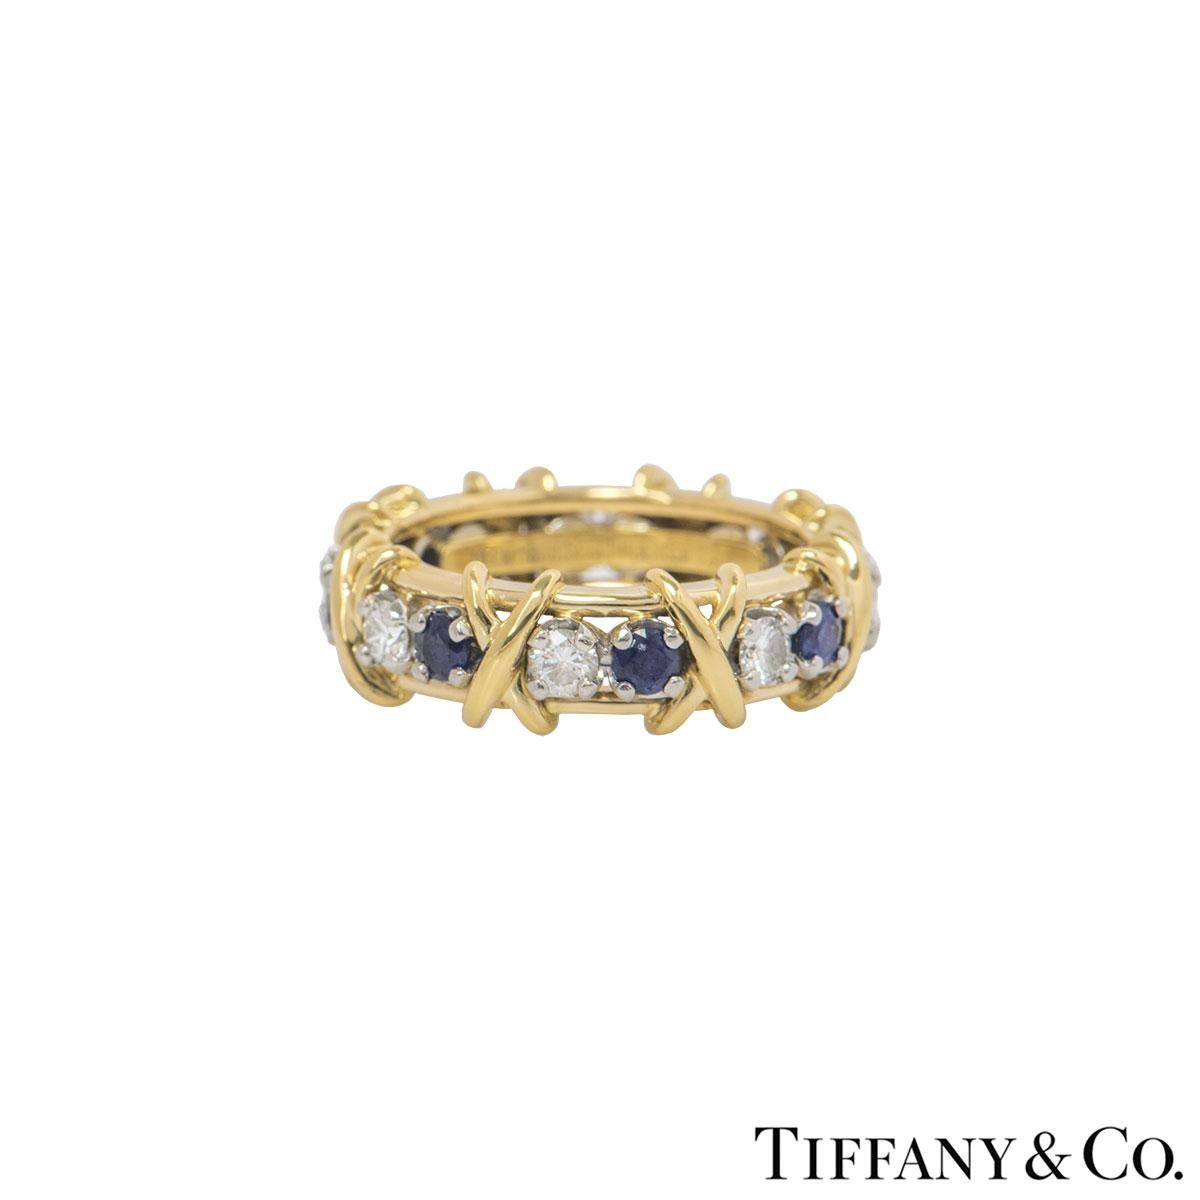 A stunning 18k yellow gold and platinum diamond and sapphire ring by Tiffany & Co. from the Schlumberger collection. The ring features 8 round brilliant cut diamonds alternating with 8 round cut sapphires with the iconic signature 'X' motif between